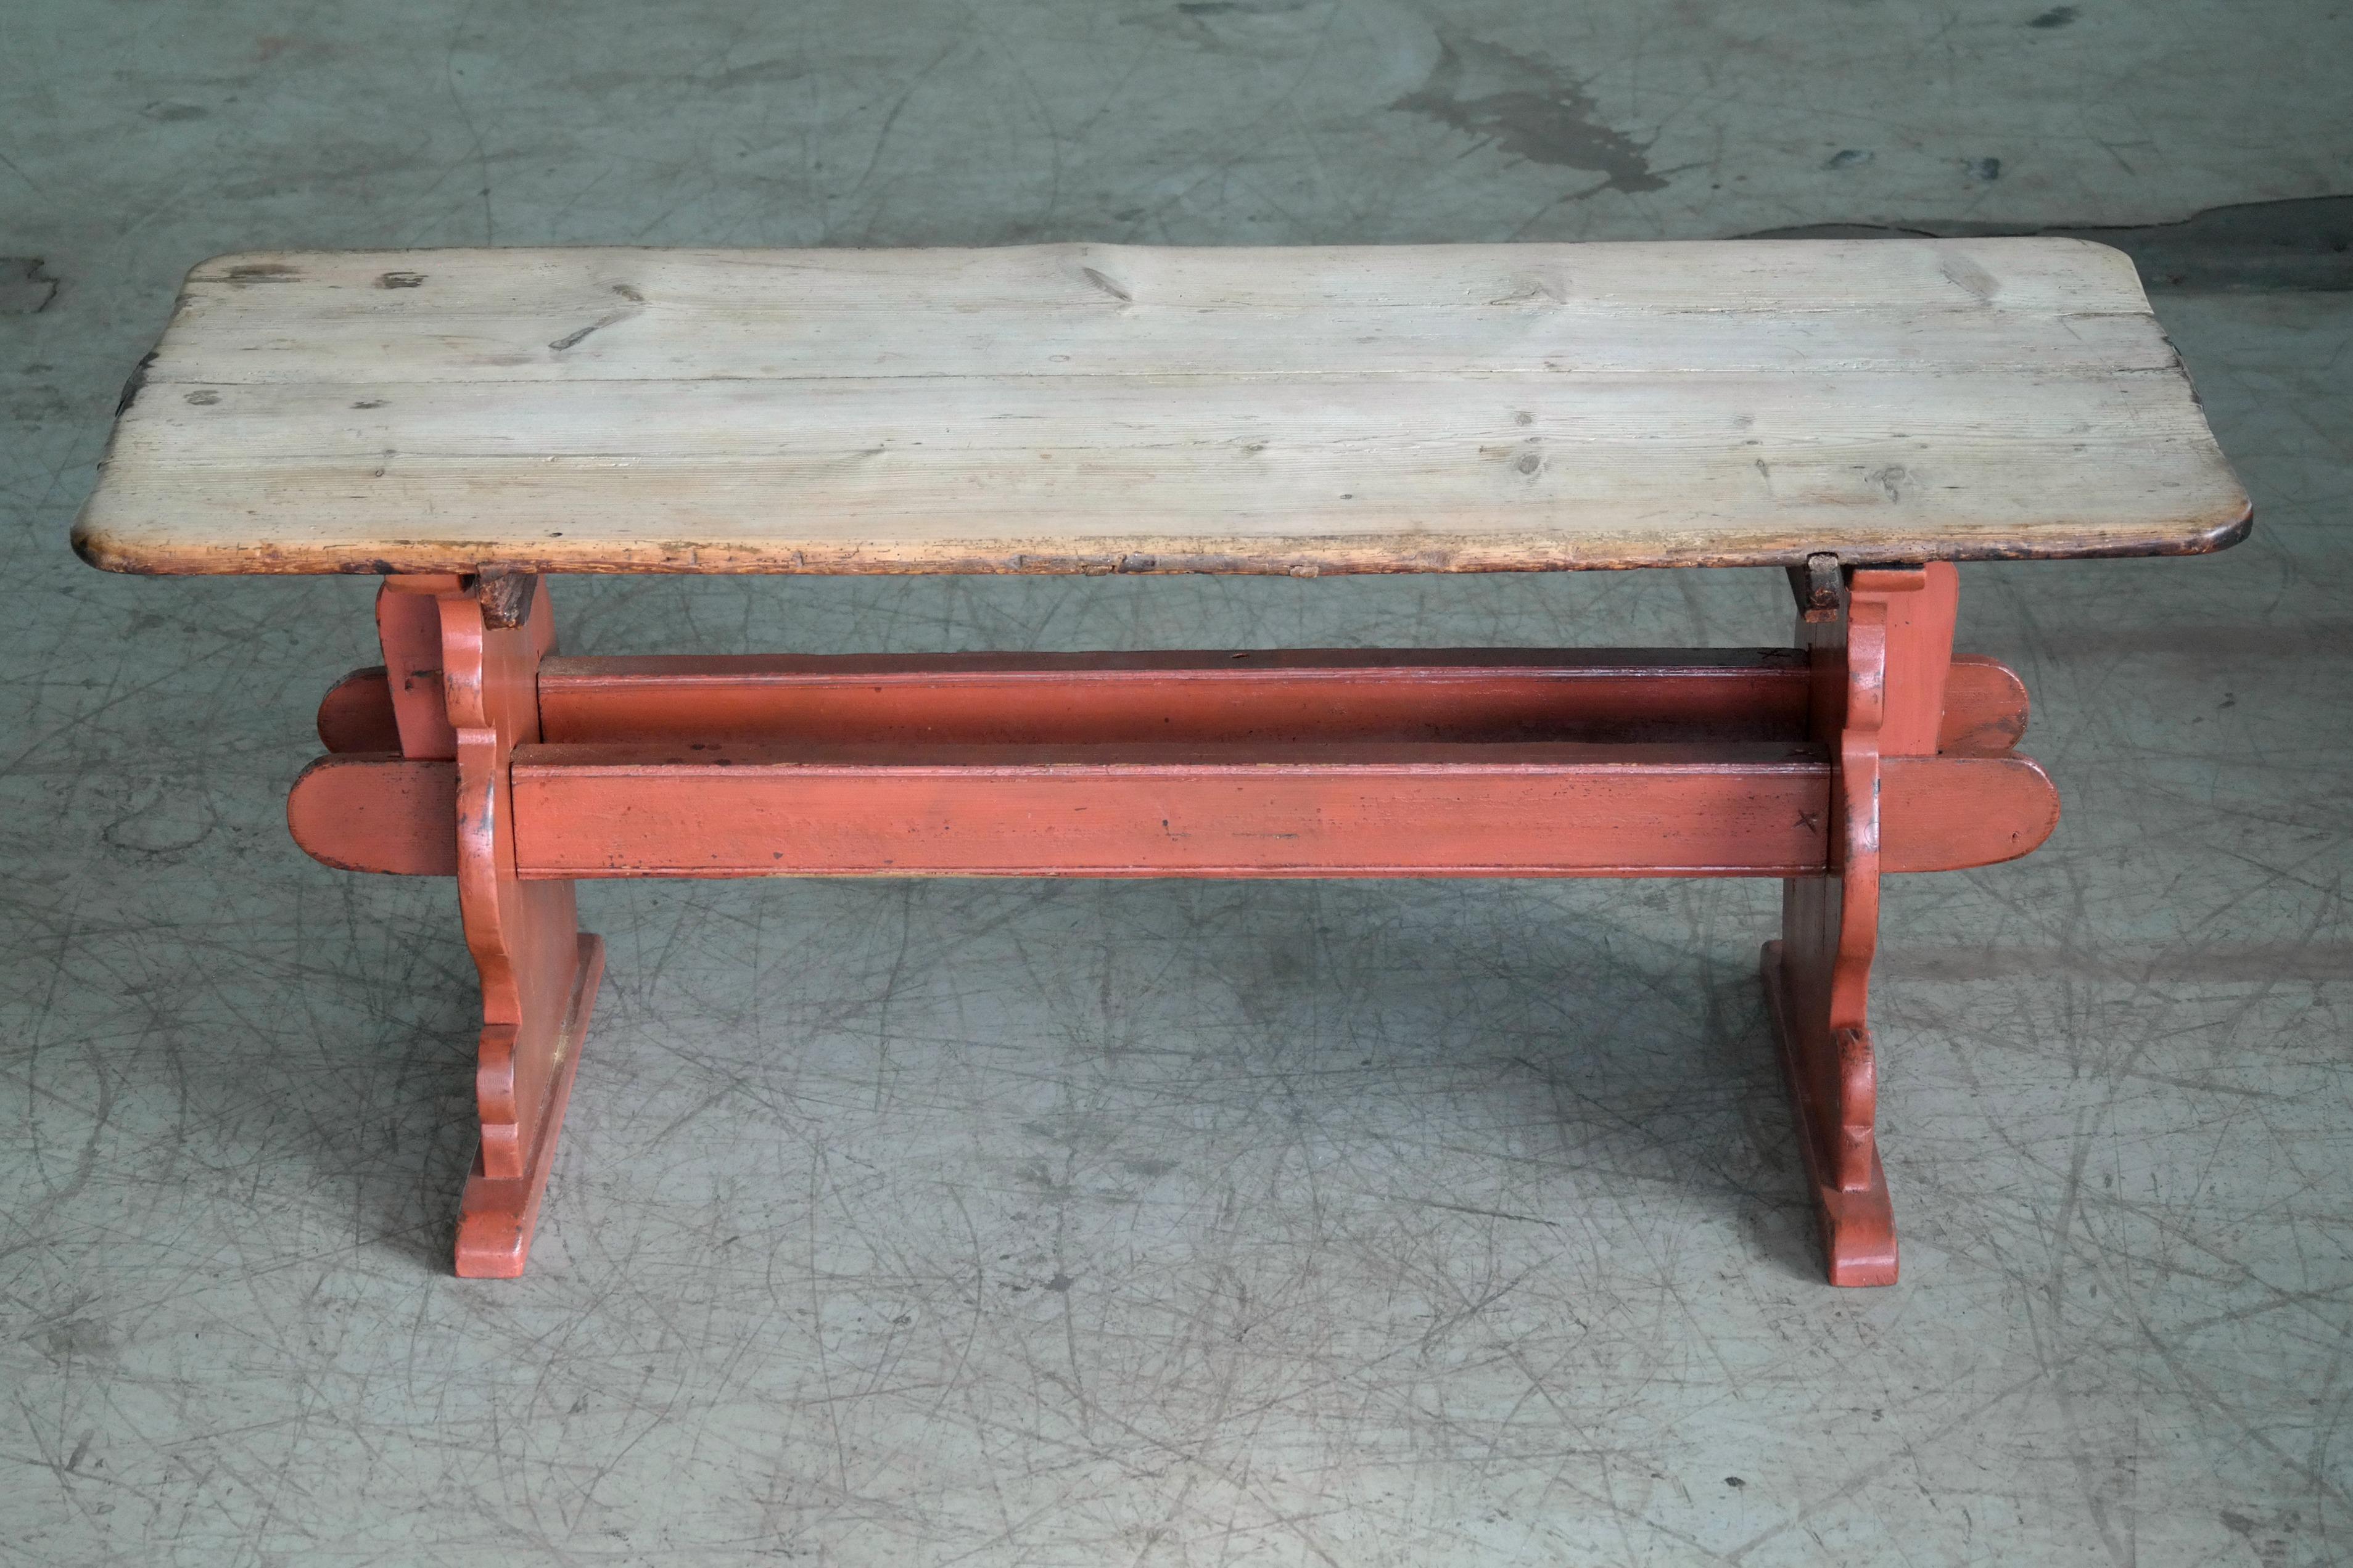 We found this charming country table in Denmark - entirely made of thick solid pine and held together without any use of screw, nails or other hardware just tongue in groove and wooden pegs. Probably made around 1900 and remains sturdy and strong.